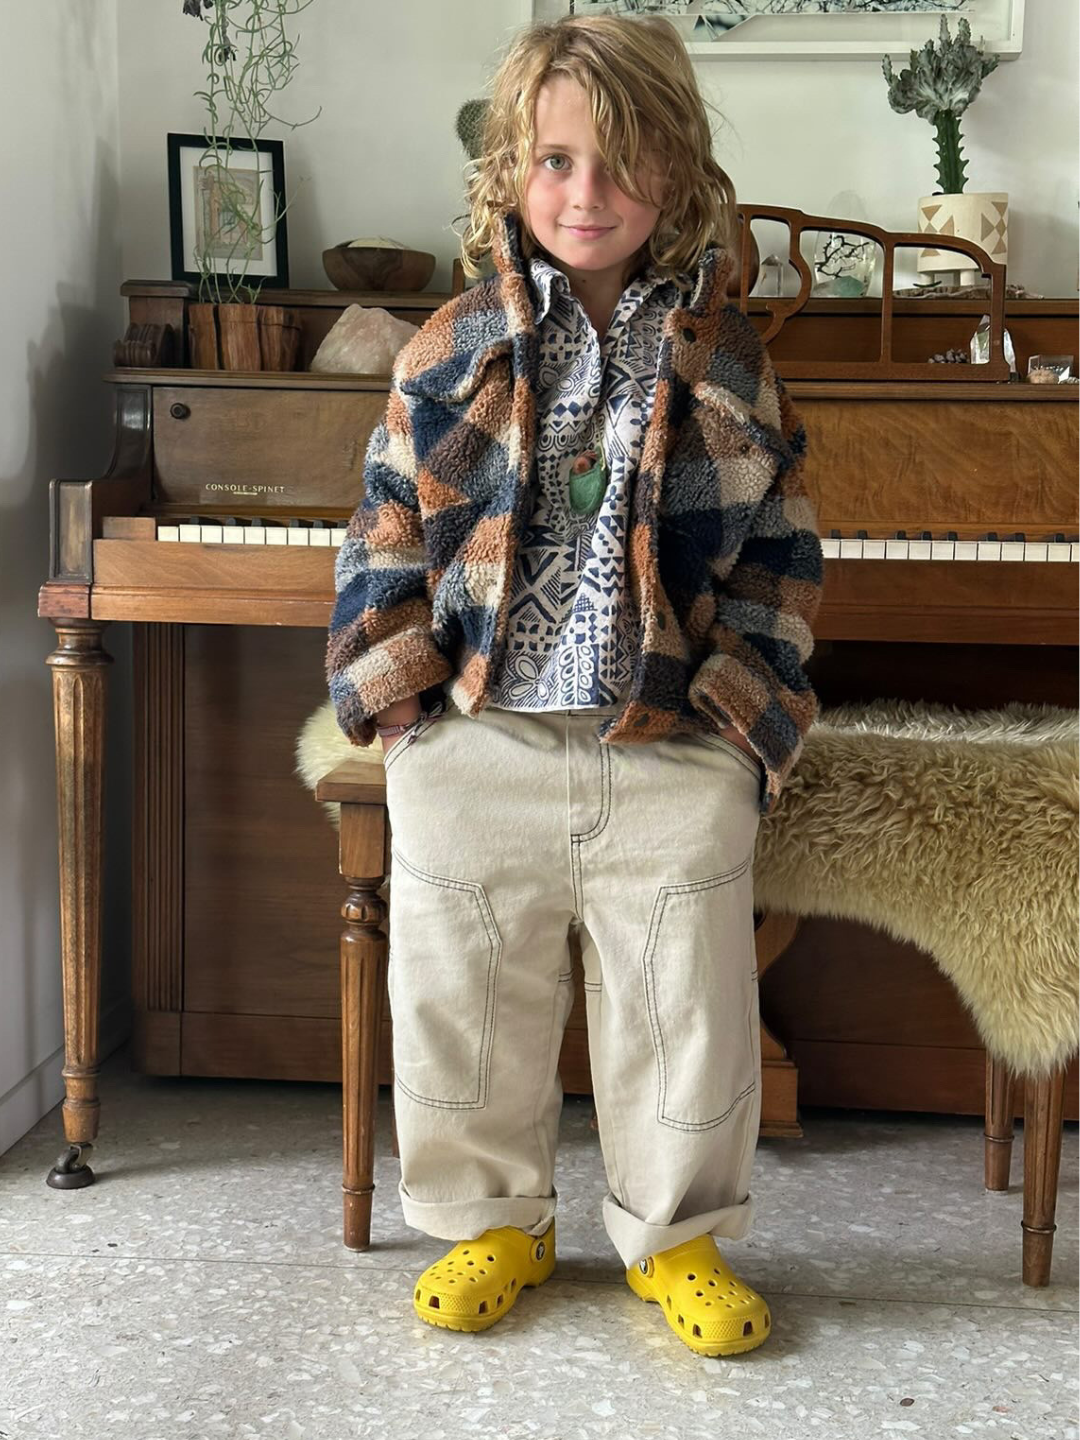 A Child is wearing Stone Stitch Jean with fuzzy checkered jacket, printed shirt, and yellow crocs. 